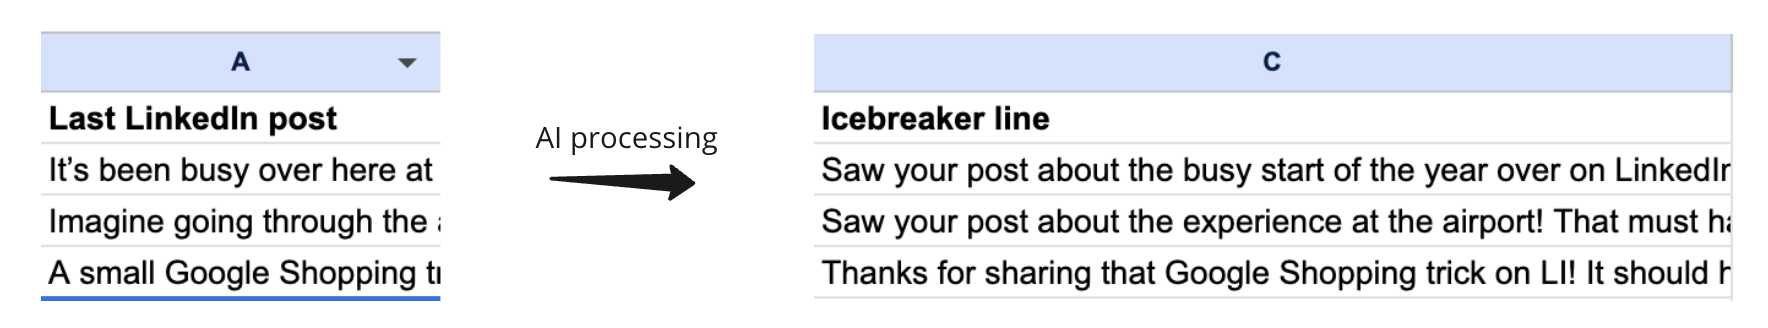 An example of AI personalization of an icebreaker line for cold emails